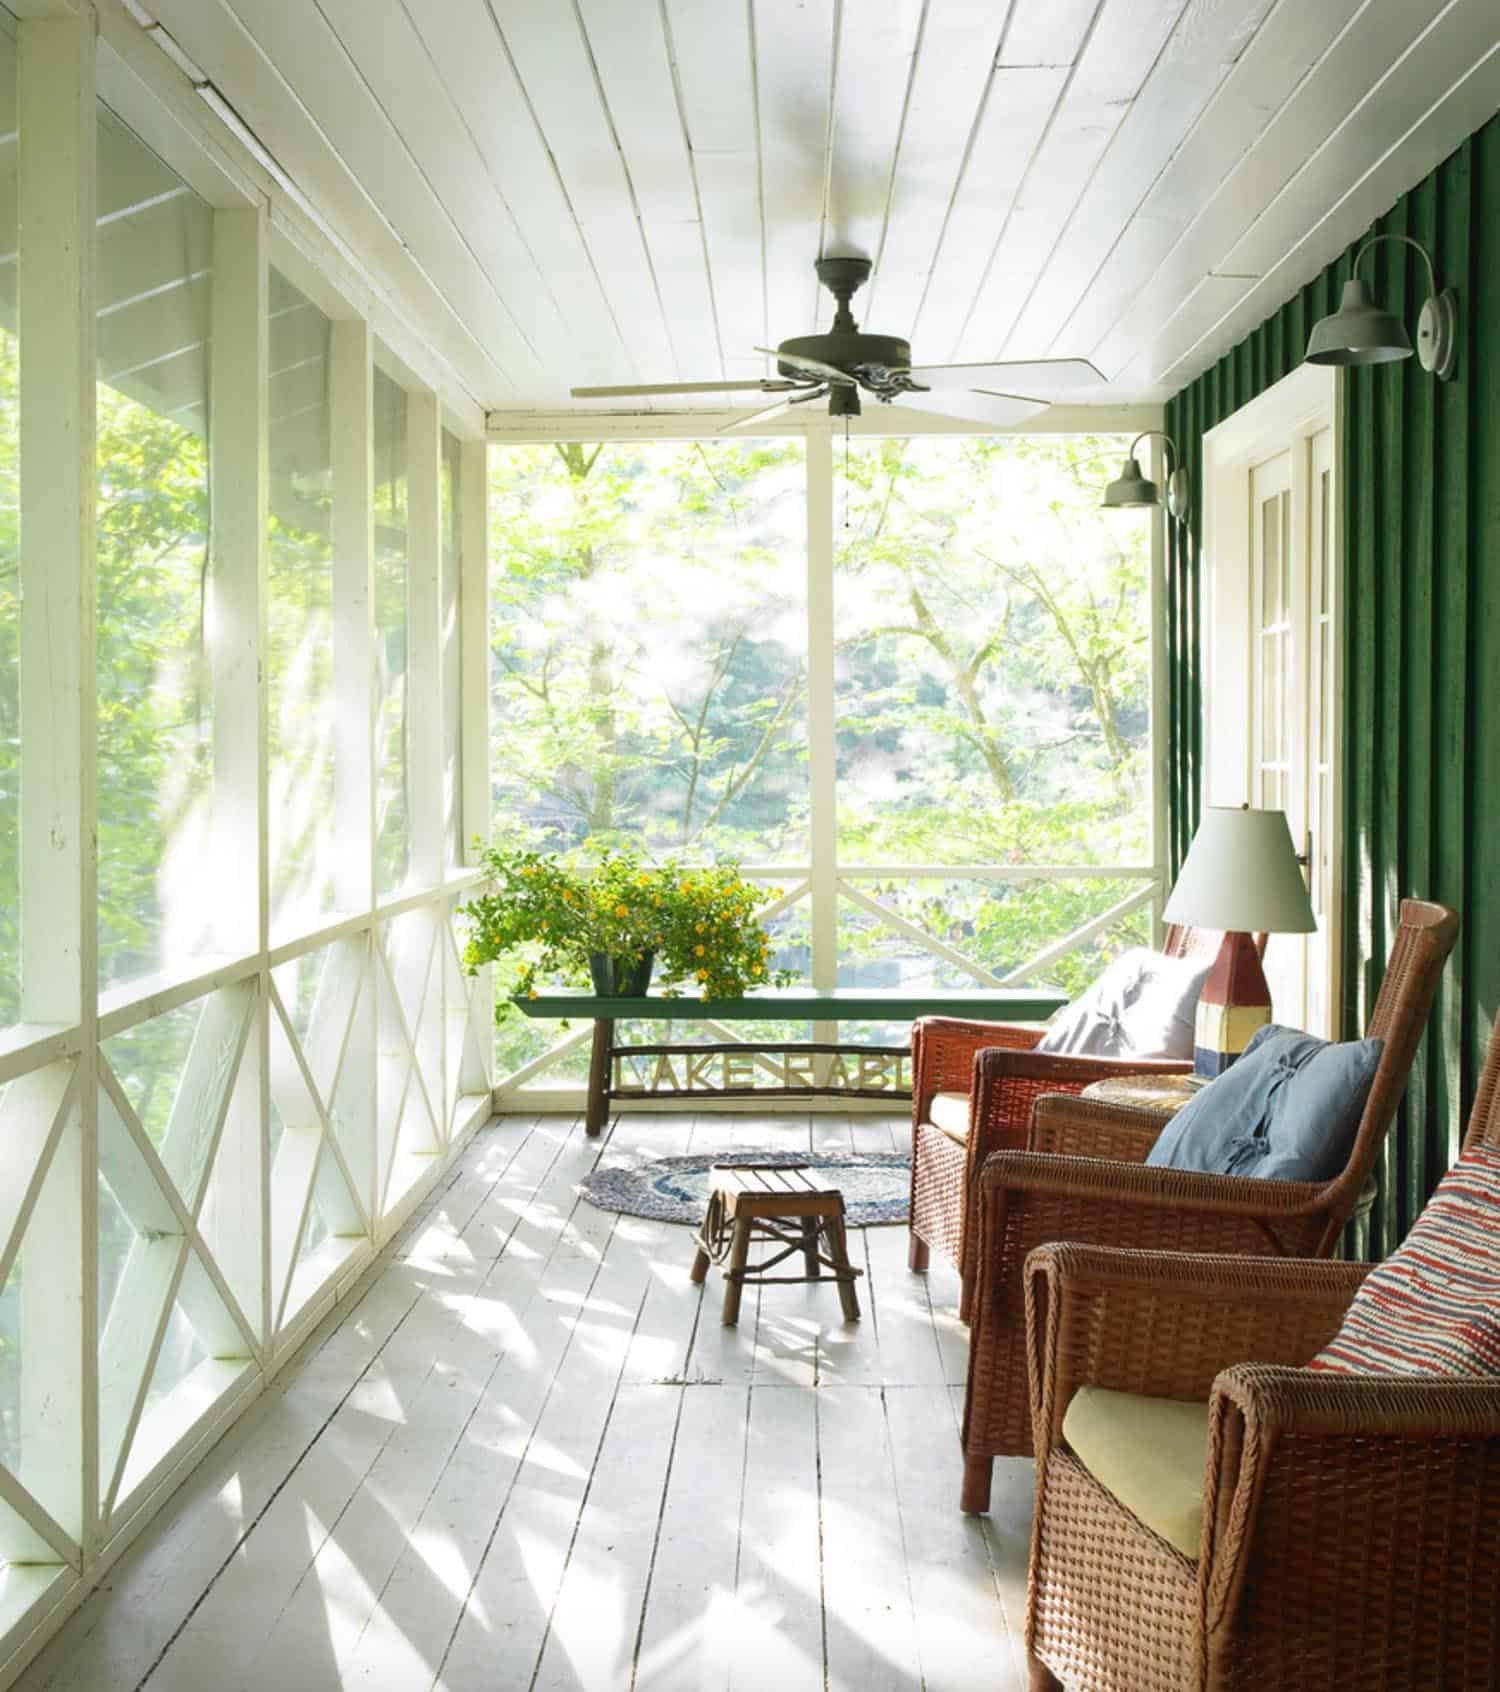 southern-style-screened-porch-ideas